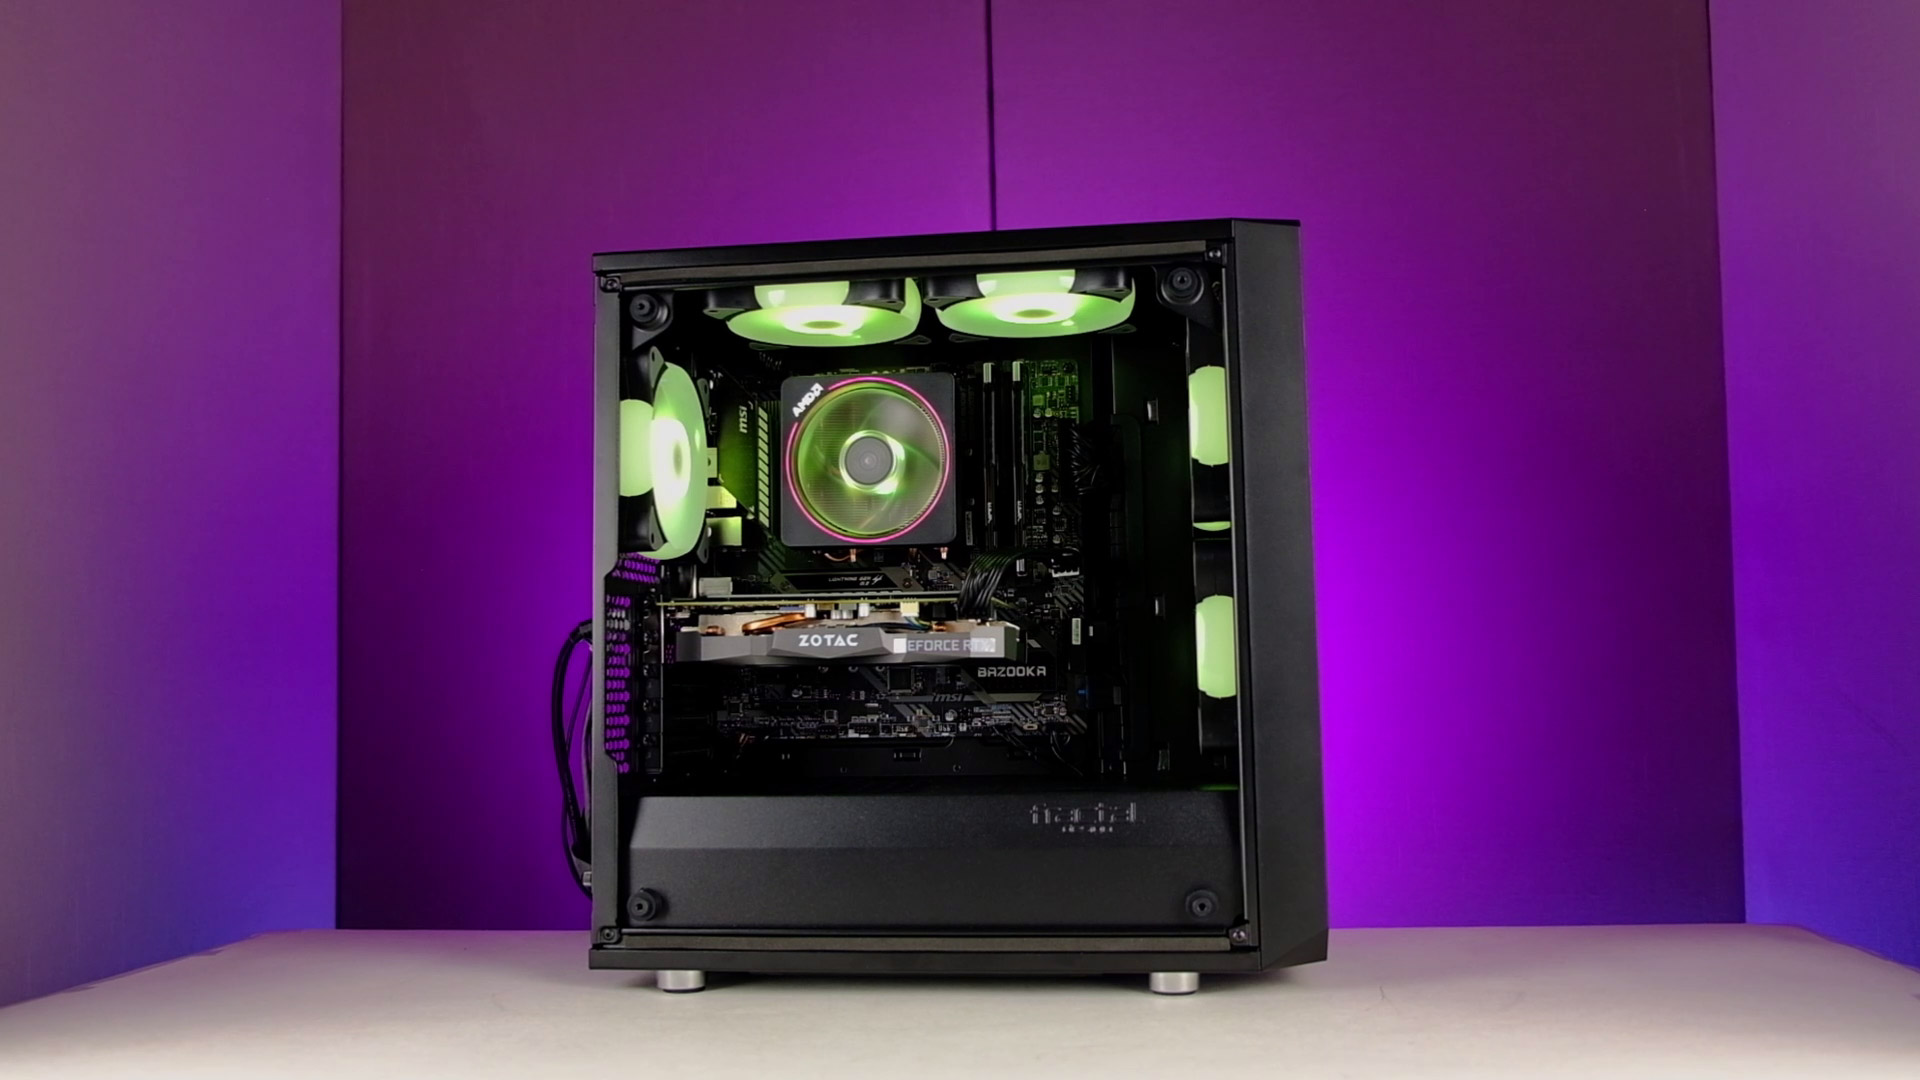 Why MicroATX should be your go-to choice for your next gaming PC build